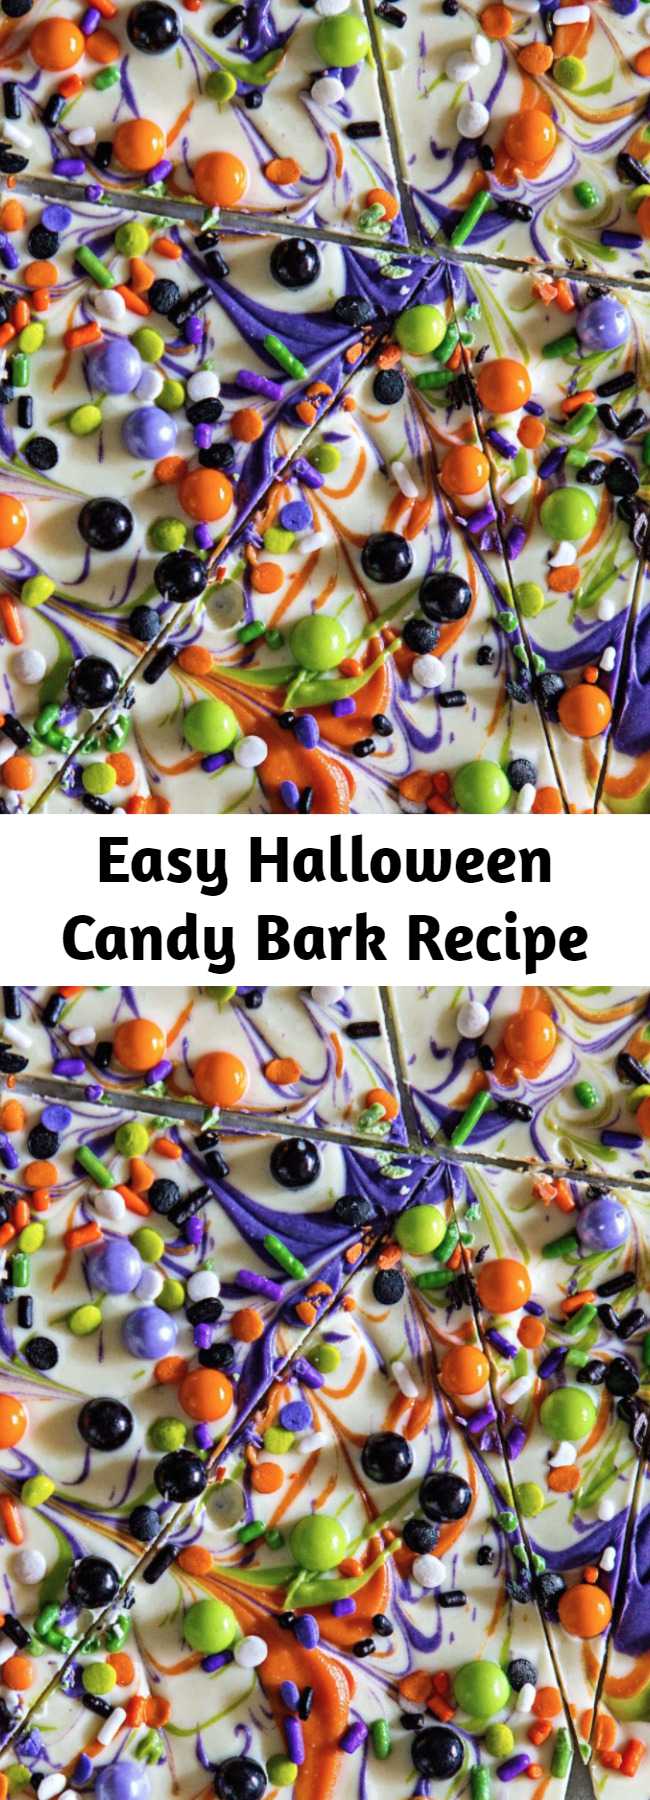 Easy Halloween Candy Bark Recipe - This white chocolate bark is probably the most simple from-scratch Halloween treat you can make.